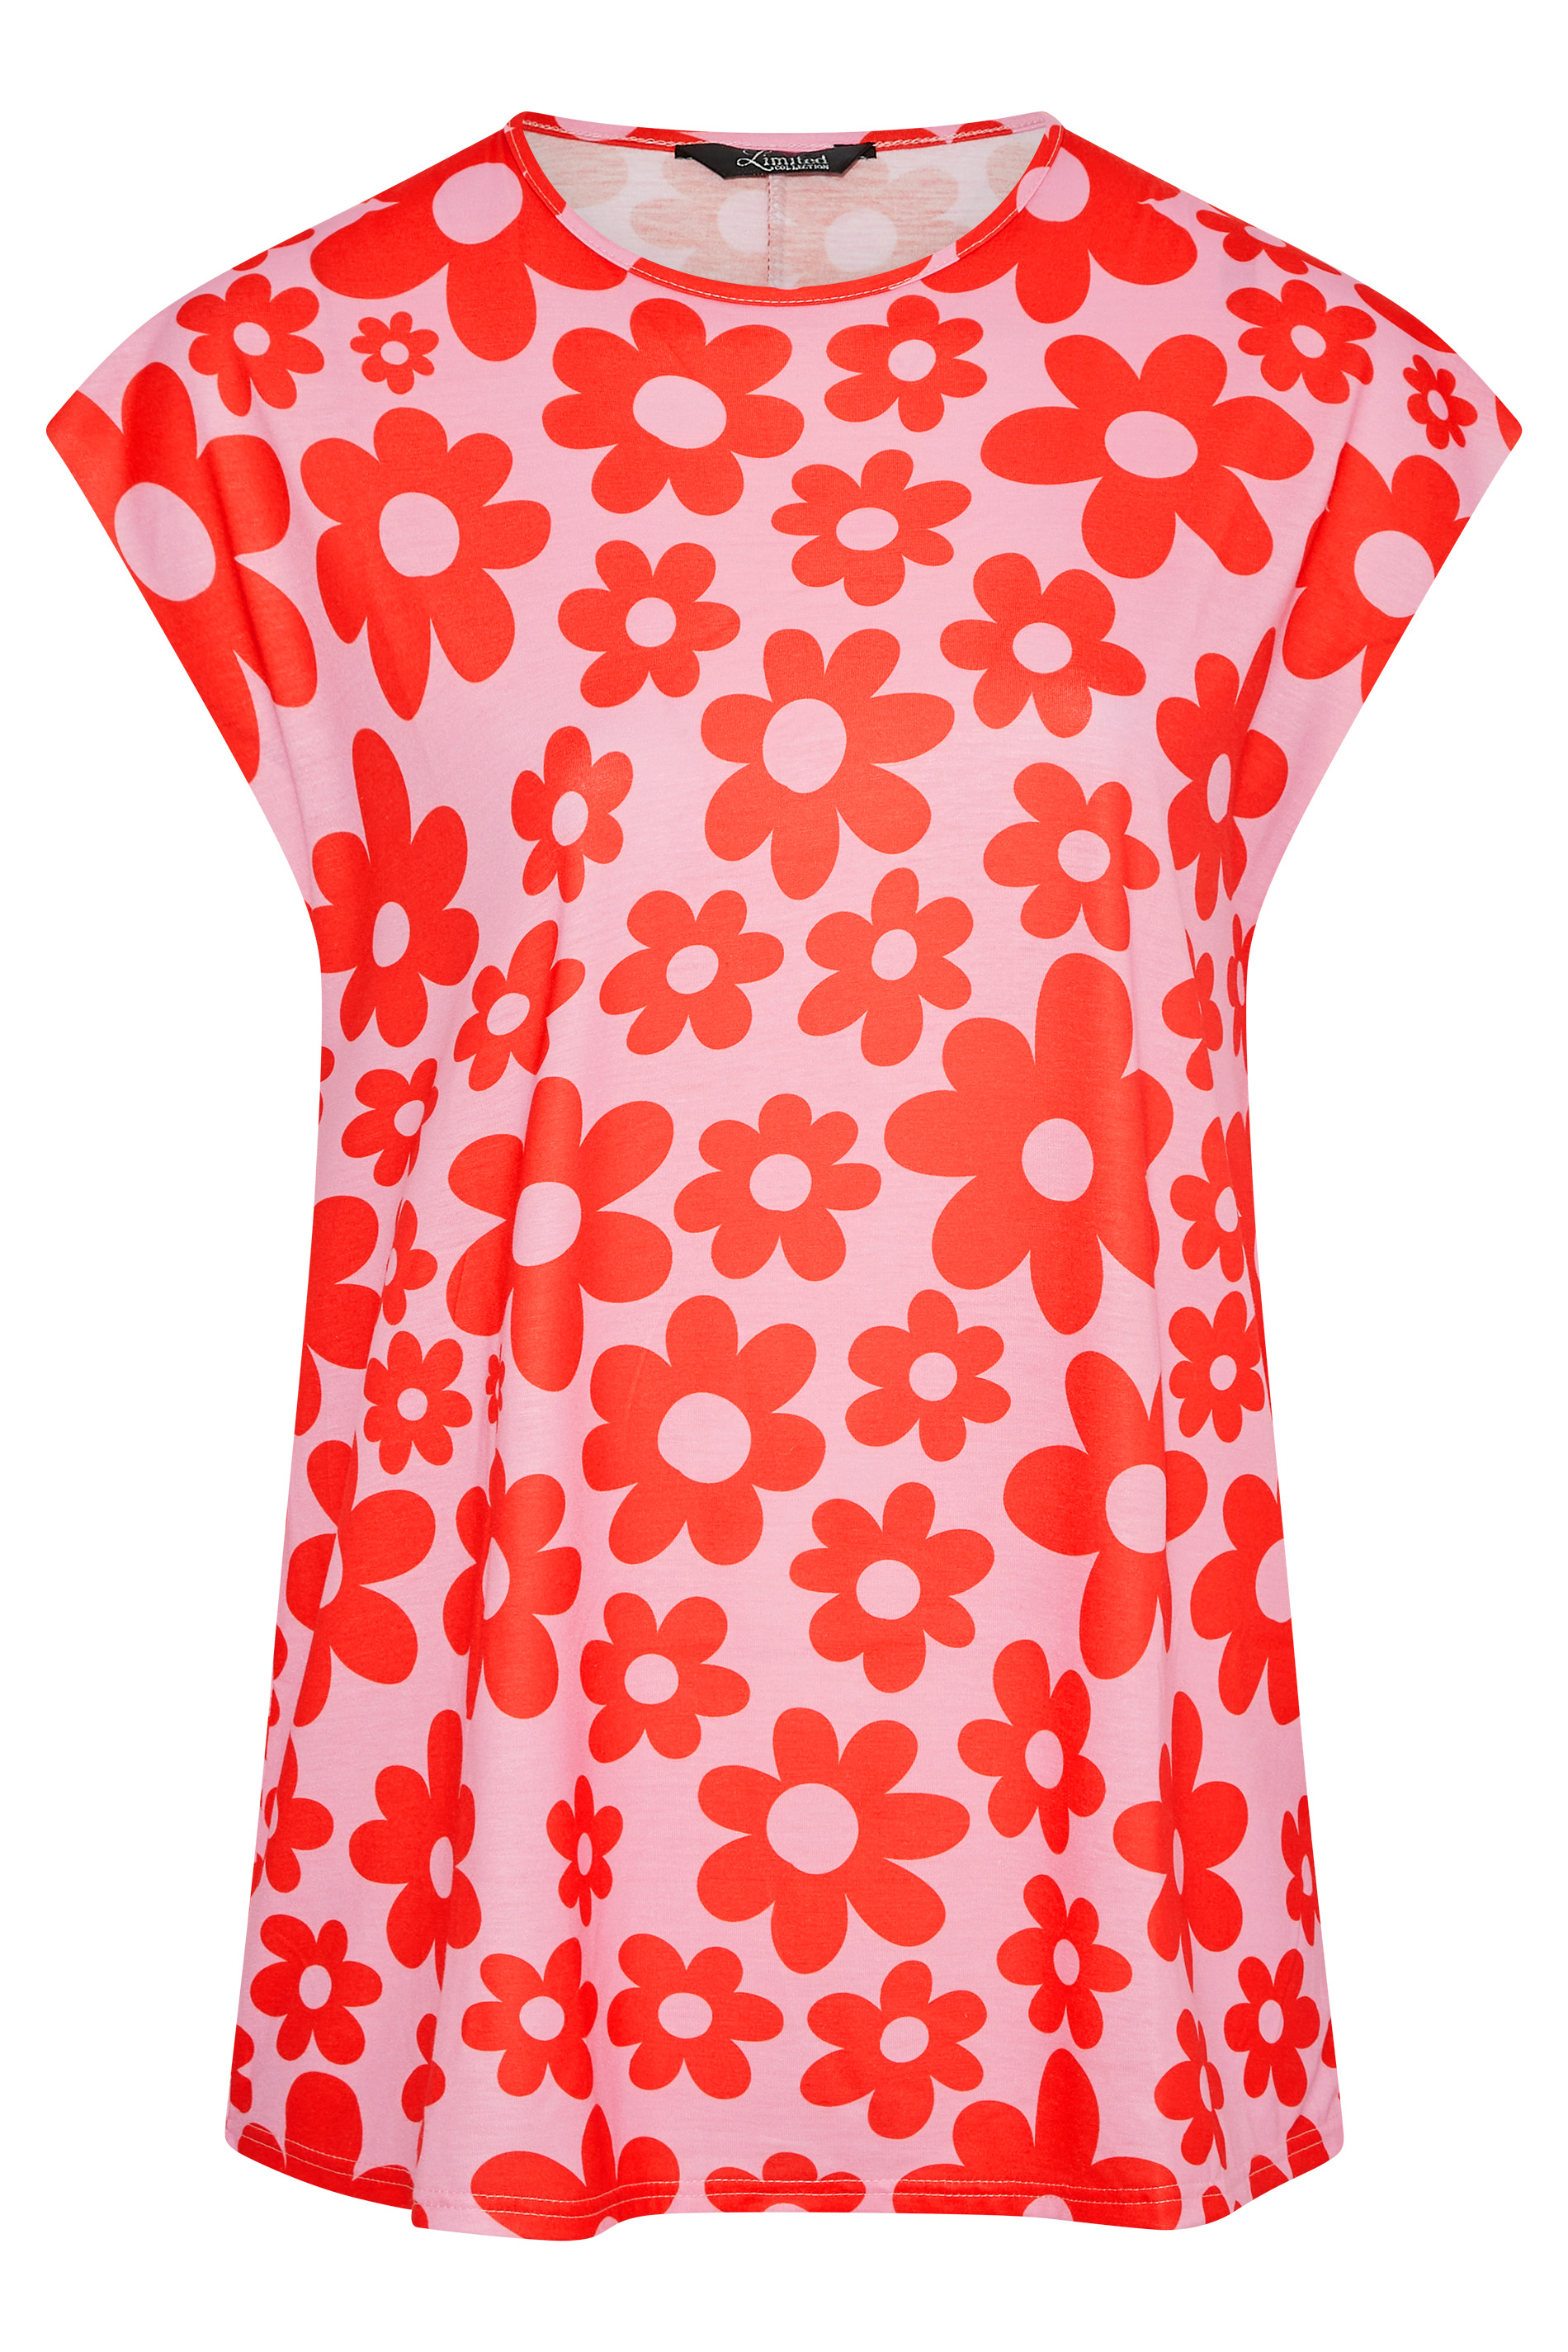 Grande taille  Tops Grande taille  Tops Jersey | LIMITED COLLECTION - T-Shirt Rétro Rose Floral Rouge - RJ23503